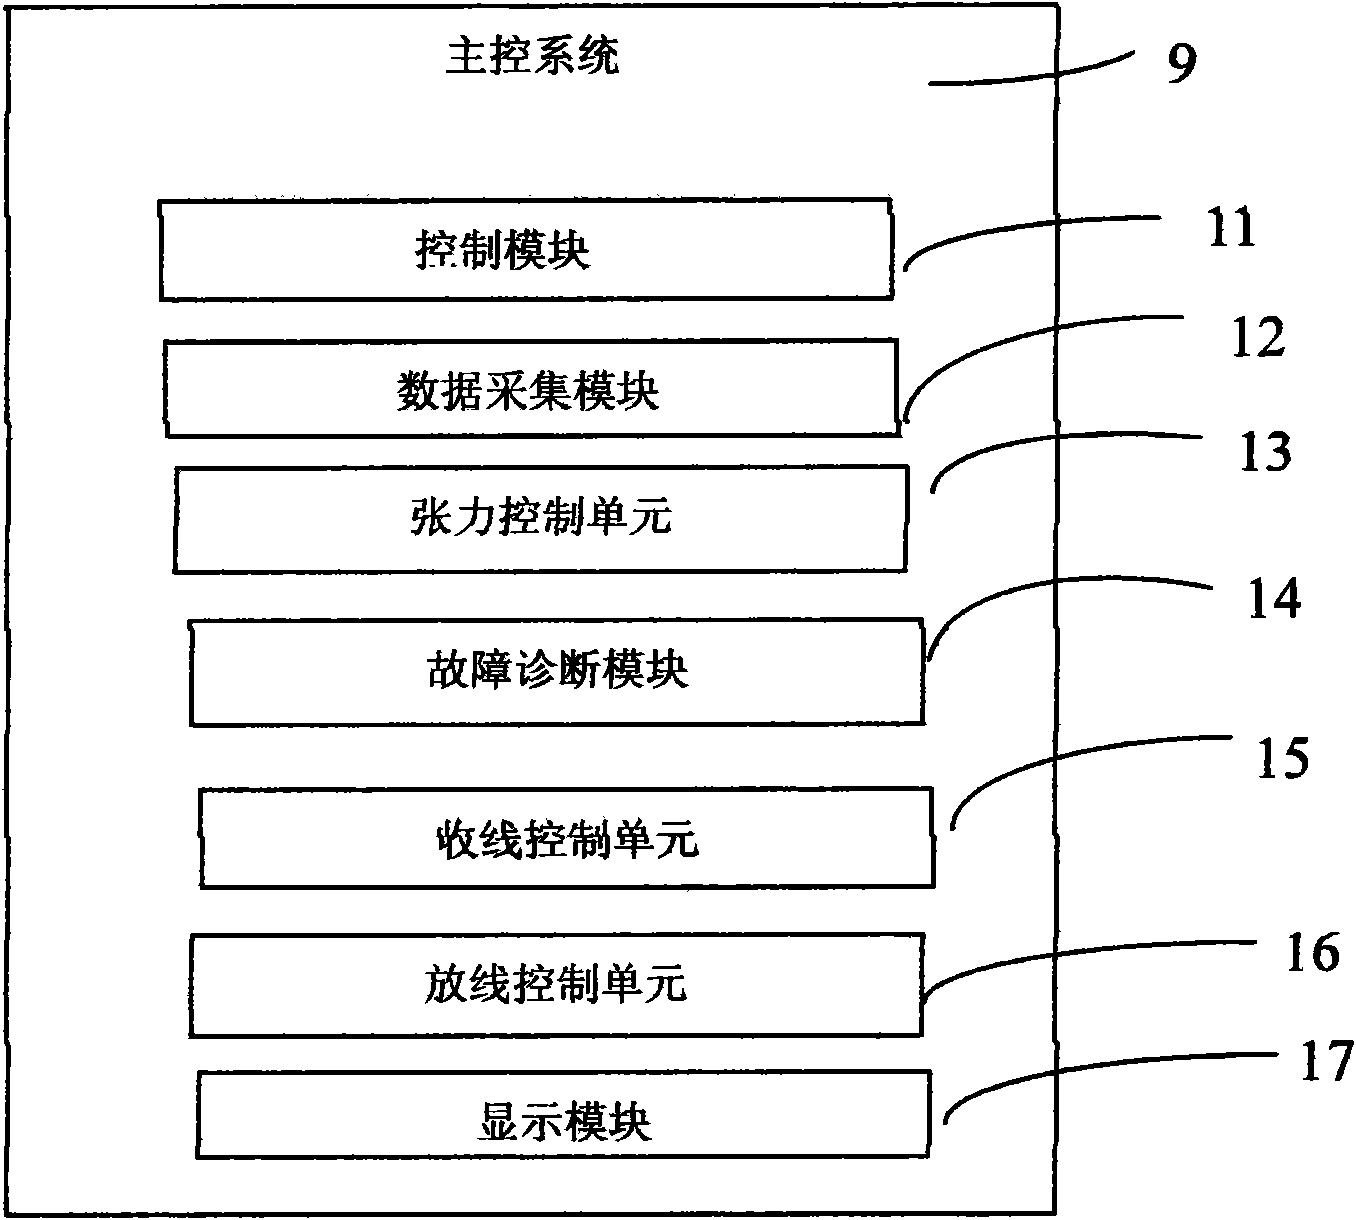 Tension control system for fiber core colored receiving and releasing wires